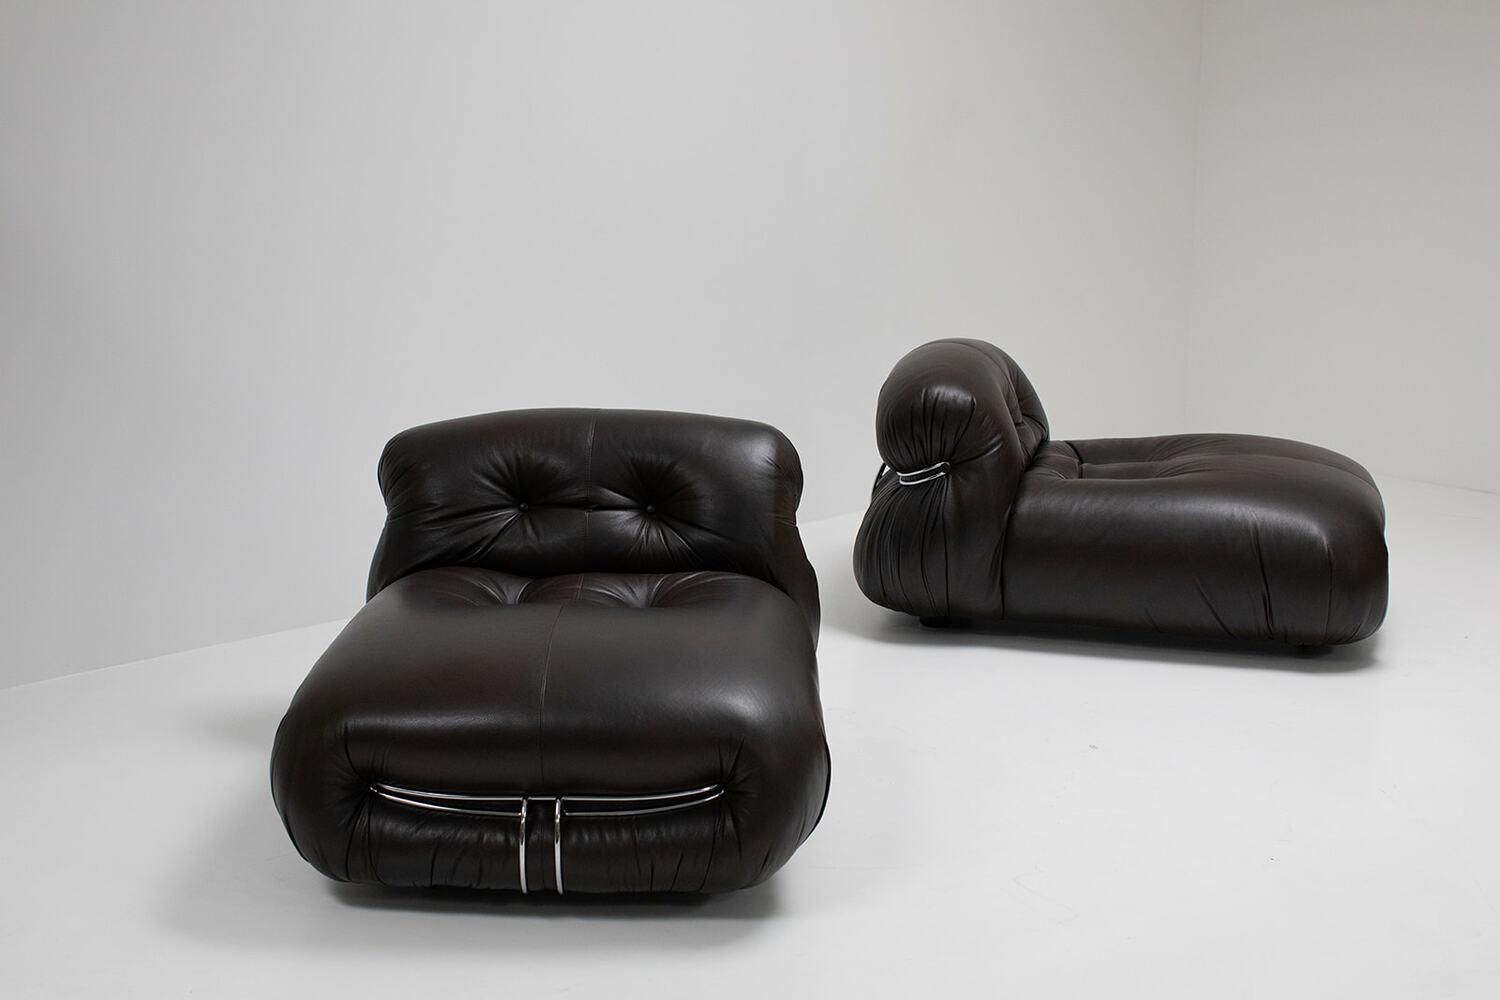 Pair of dark brown leather Soriano lounge chairs